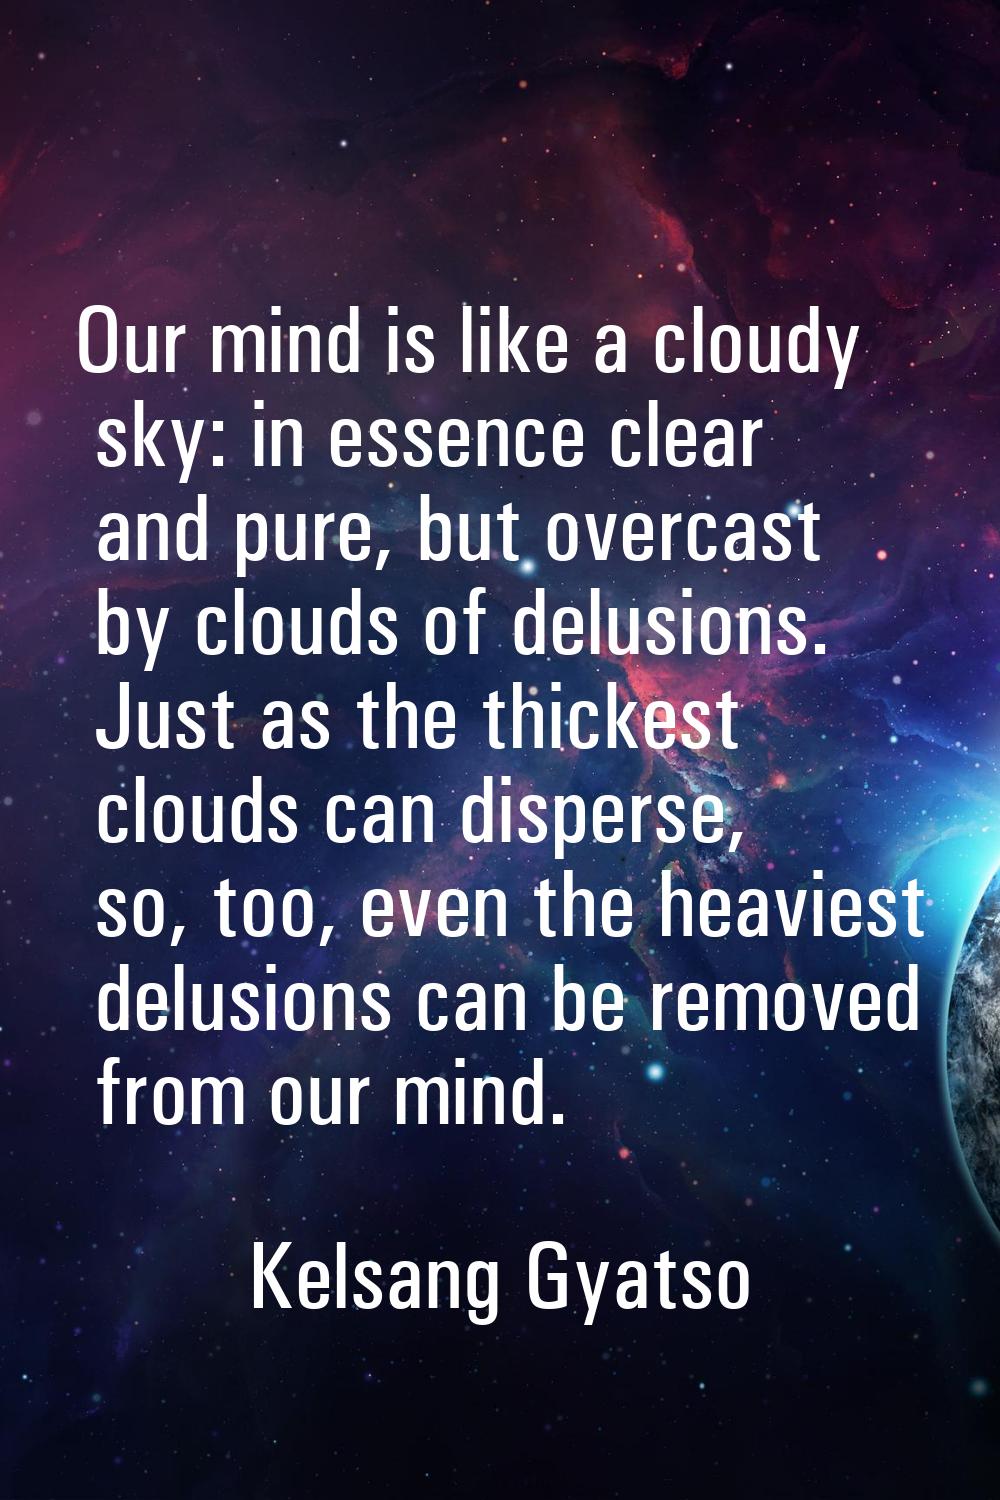 Our mind is like a cloudy sky: in essence clear and pure, but overcast by clouds of delusions. Just